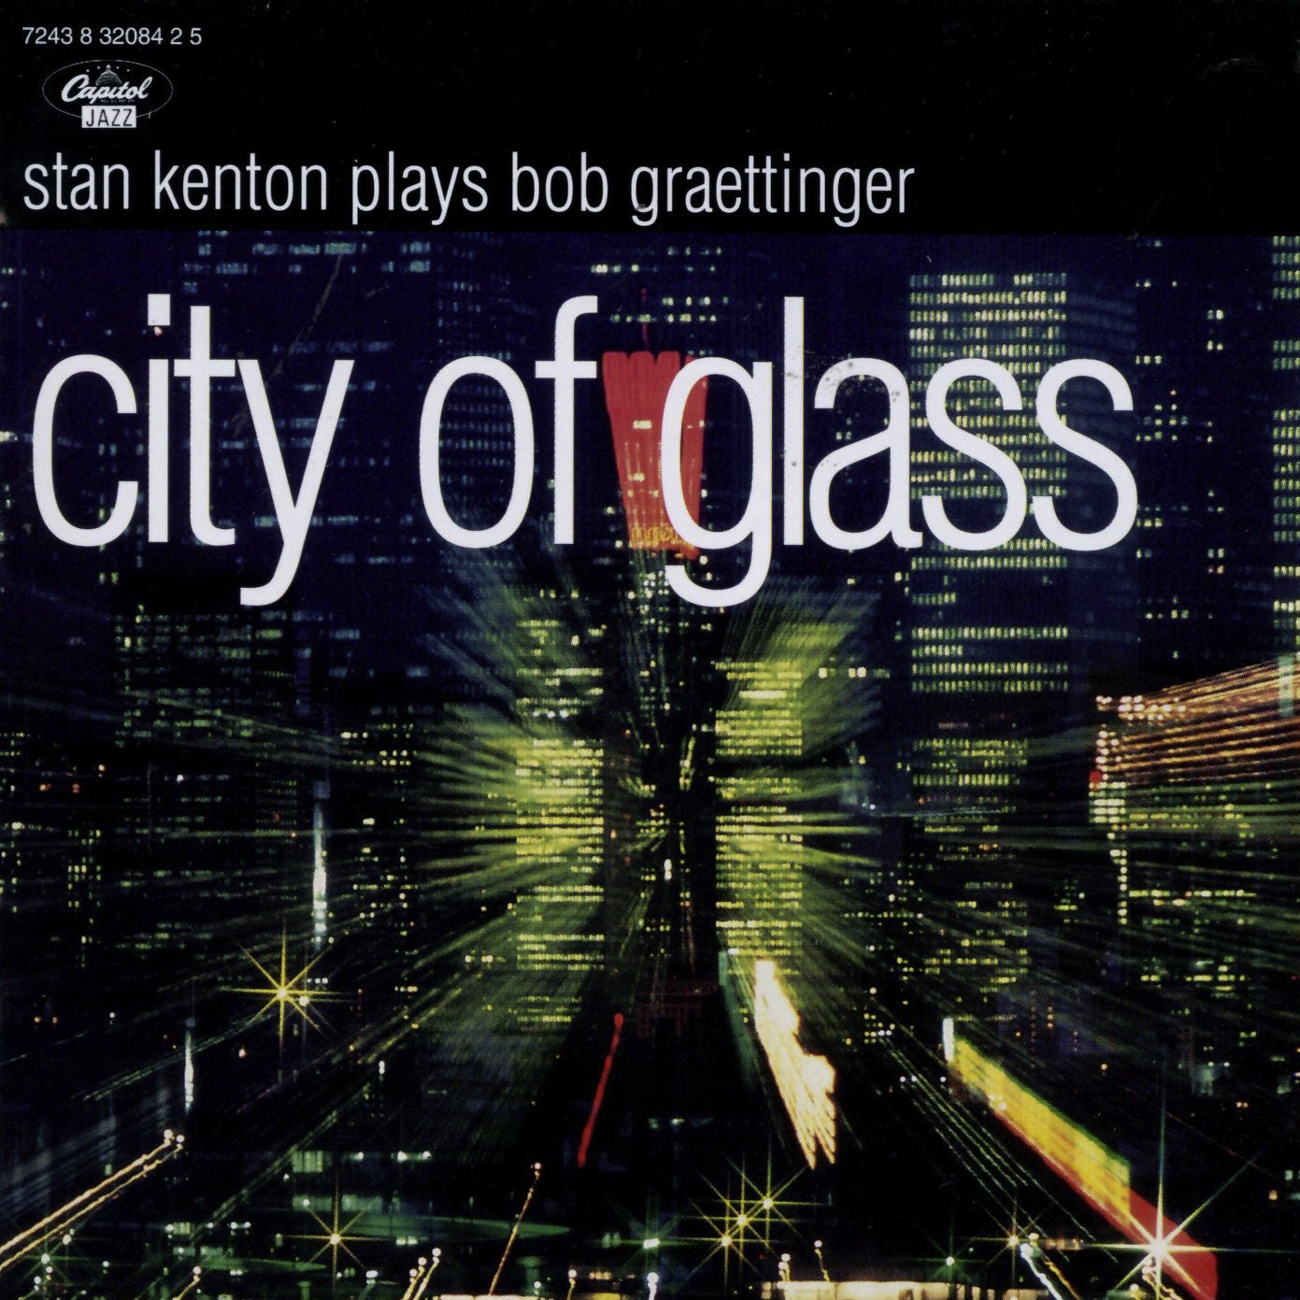 City Of Glass (Third Movement): Reflections